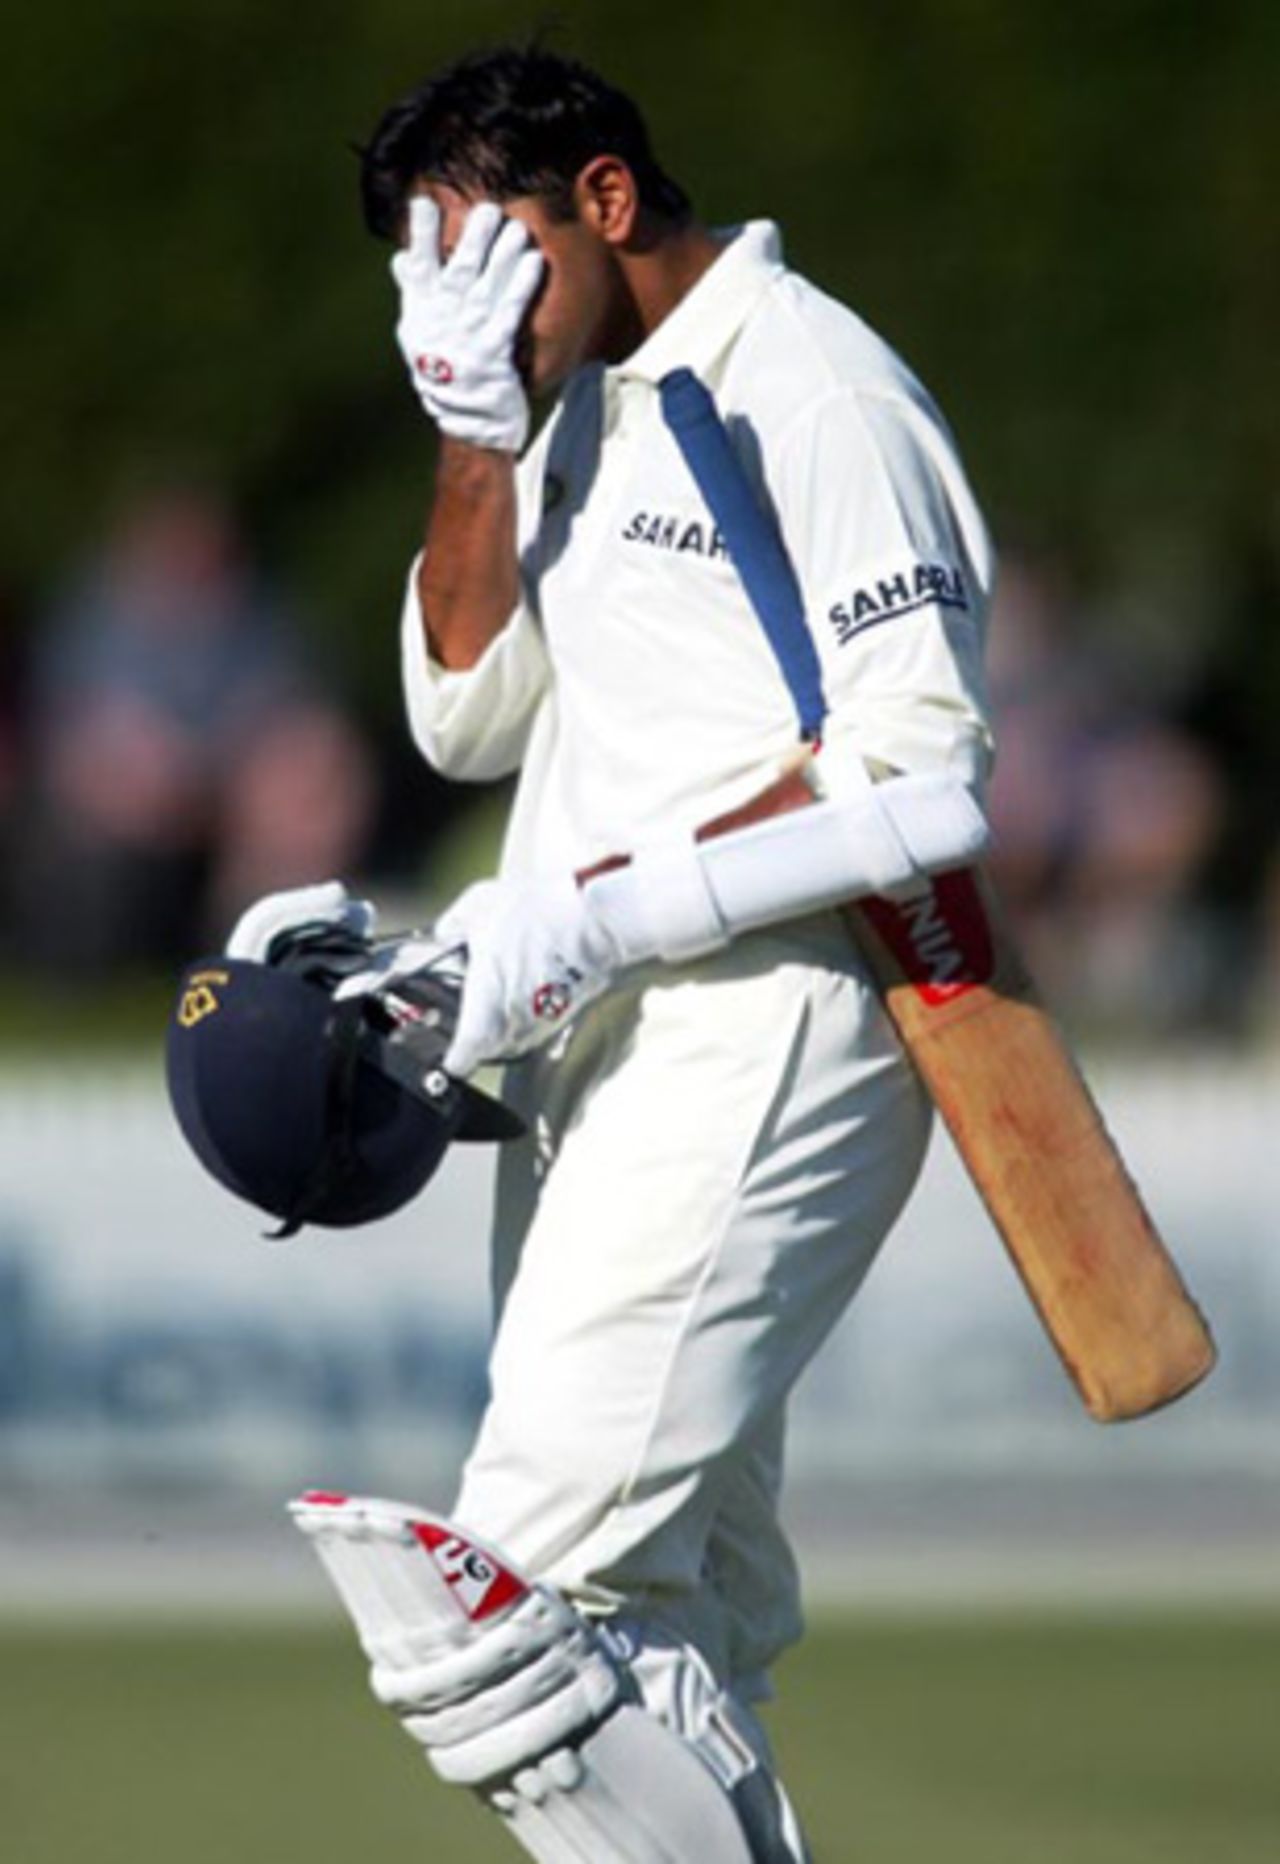 Indian batsman Rahul Dravid leaves the field after being dismissed, caught by wicket-keeper Robbie Hart off the bowling of Daryl Tuffey for nine. 2nd Test: New Zealand v India at Westpac Park, Hamilton, 19-23 December 2002 (20 December 2002).